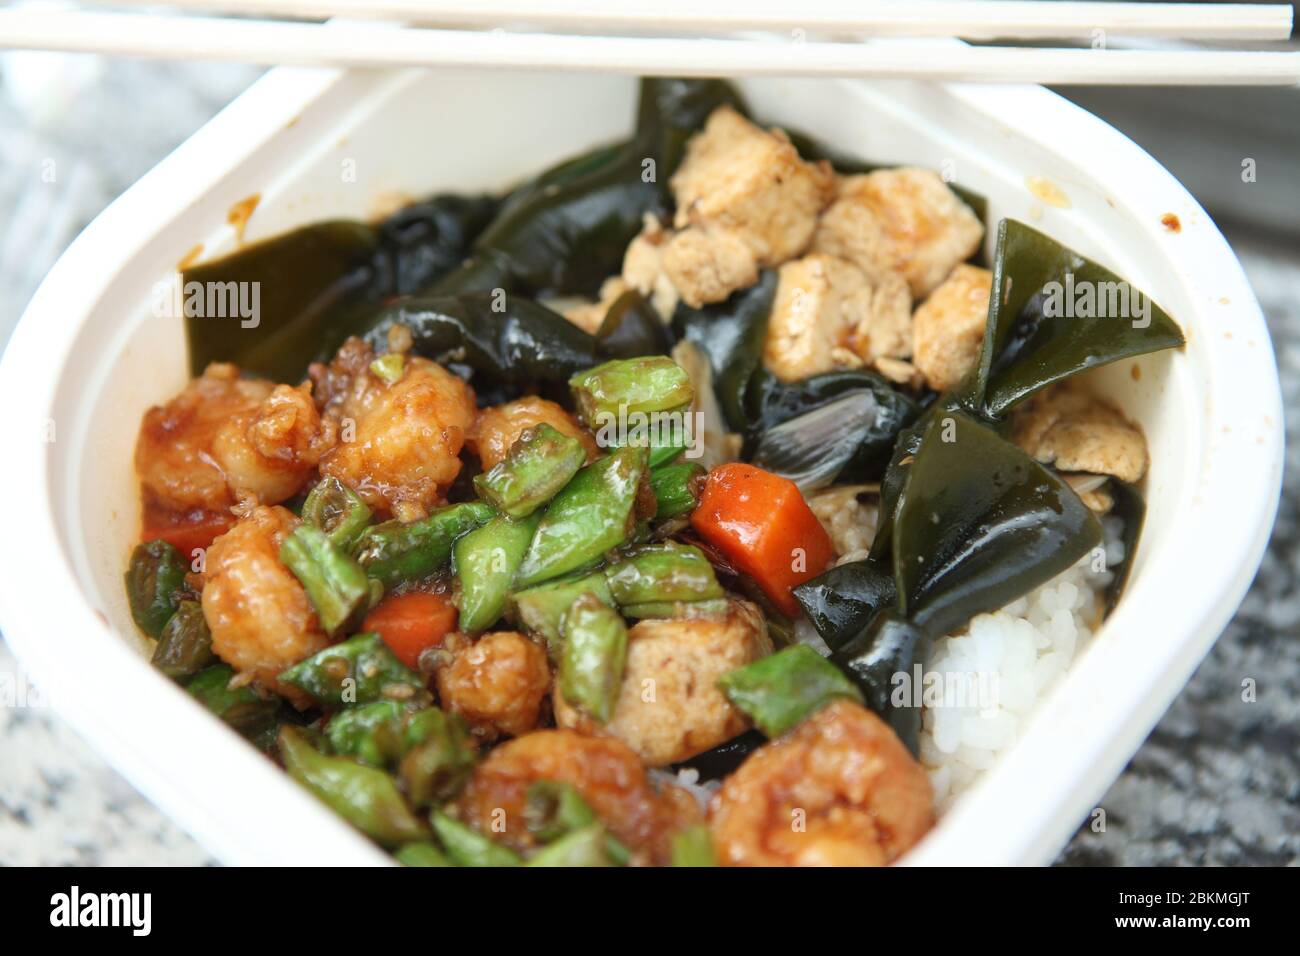 A nutritional balance chinese meal from a 7-11 store in Beijing. Stock Photo